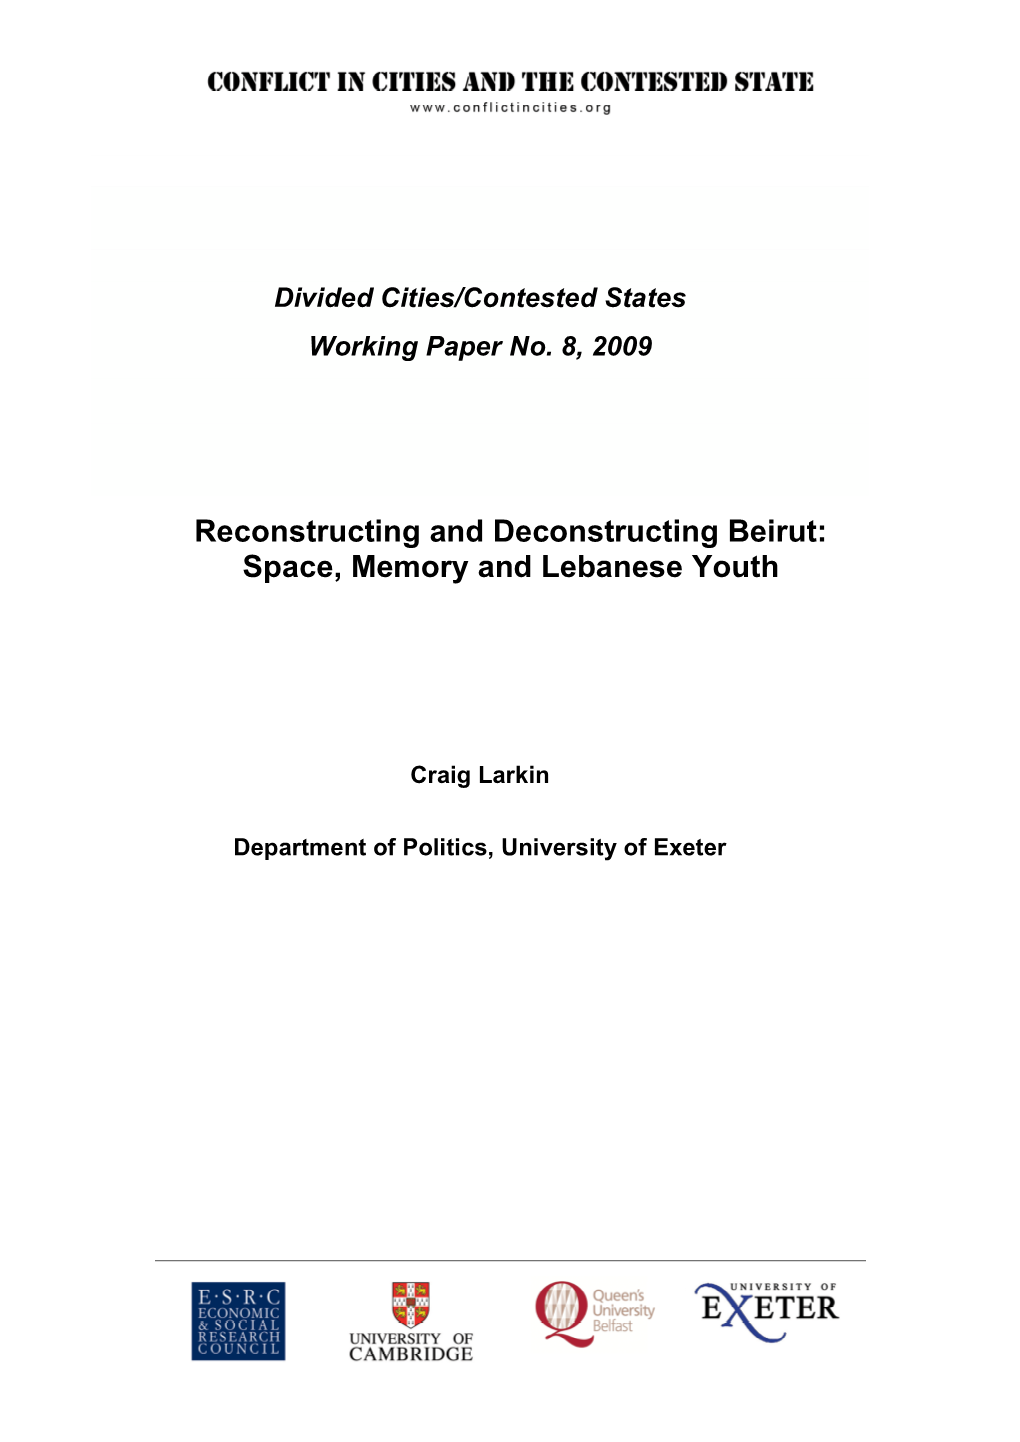 Reconstructing and Deconstructing Beirut: Space, Memory and Lebanese Youth